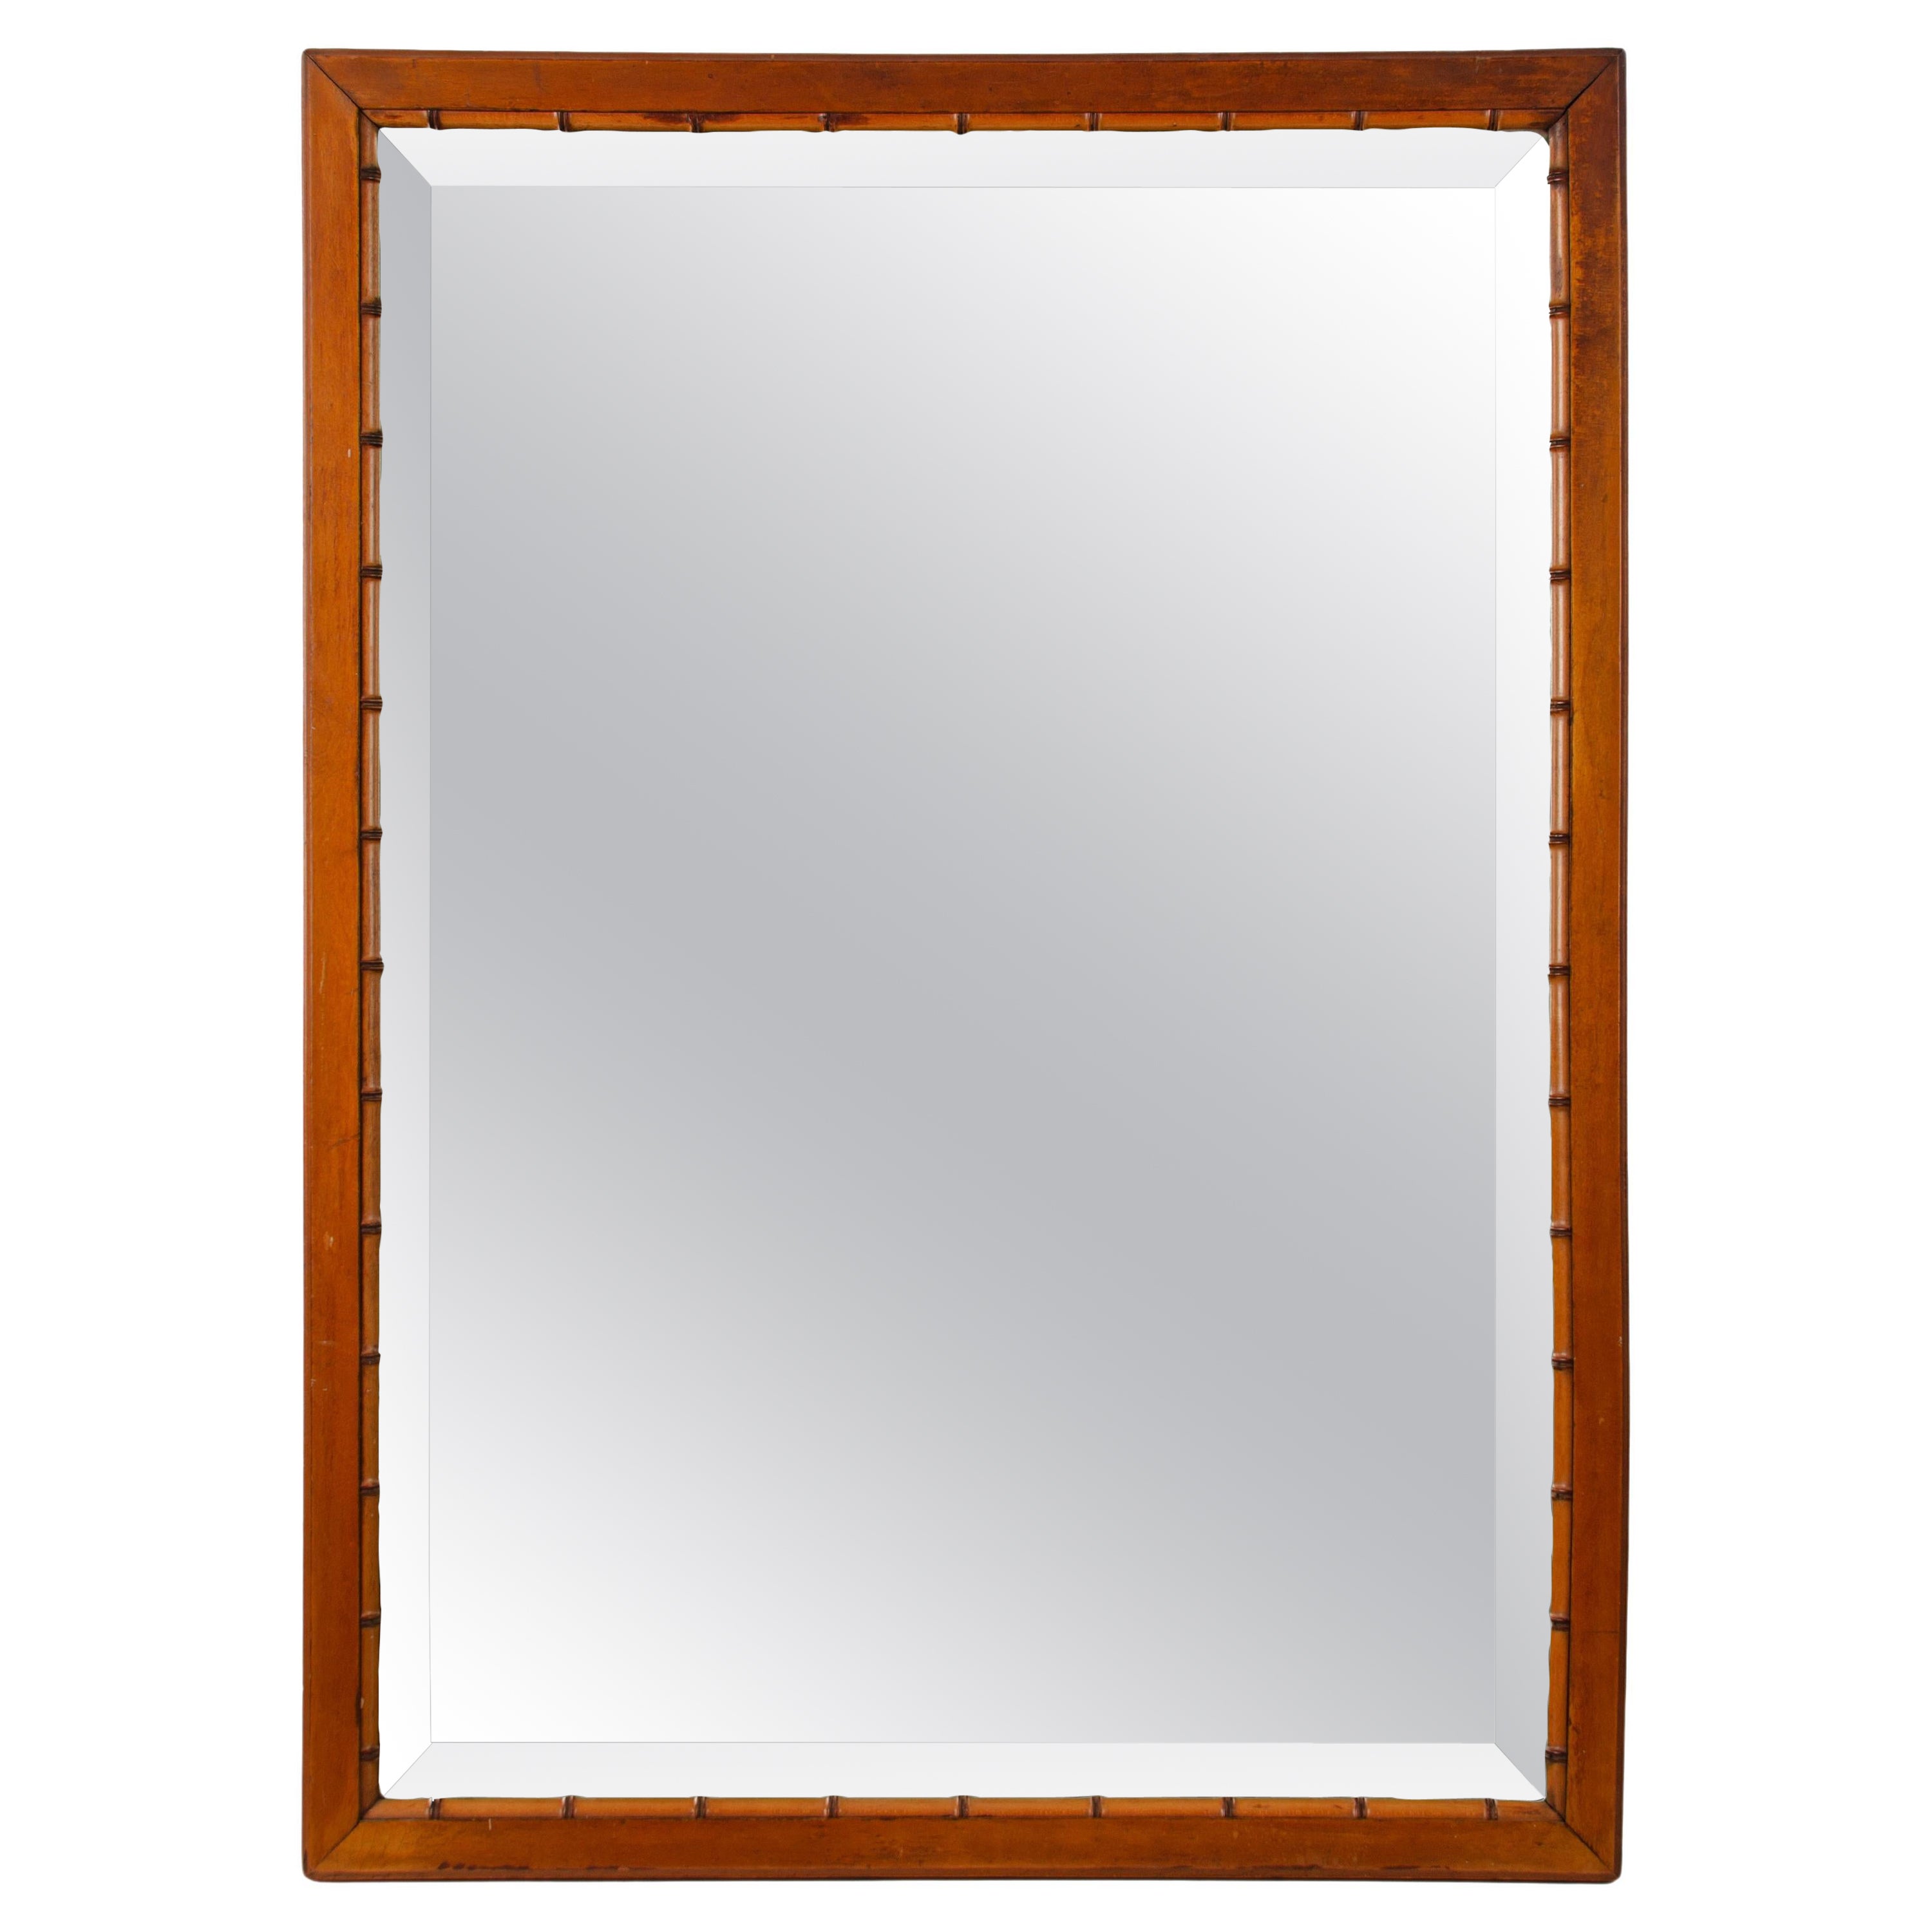 R.J. Horner Faux Bamboo Mirror For Sale